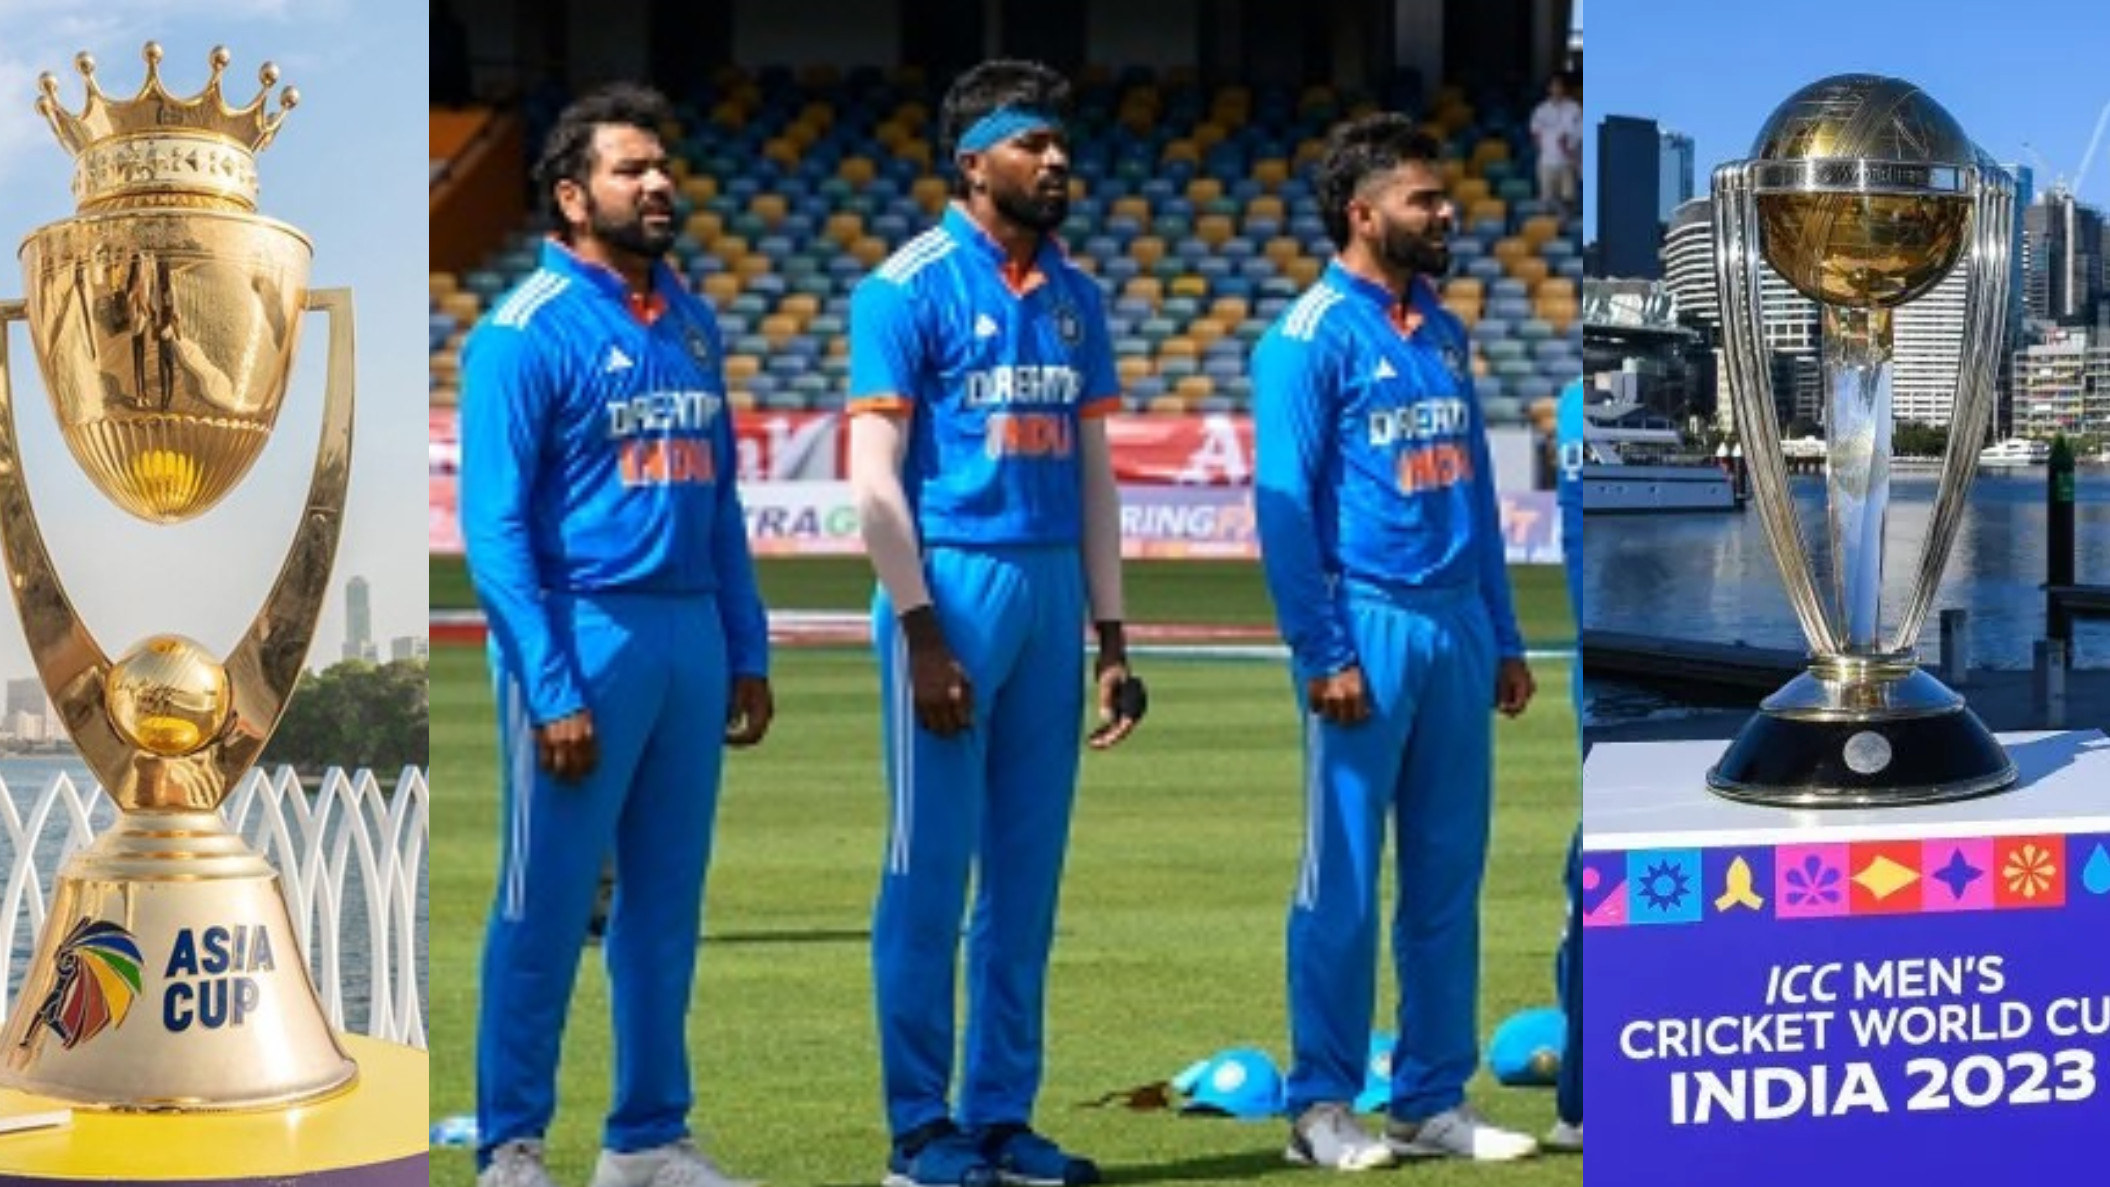 COC Predicted Team India squads for Asia Cup and World Cup 2023